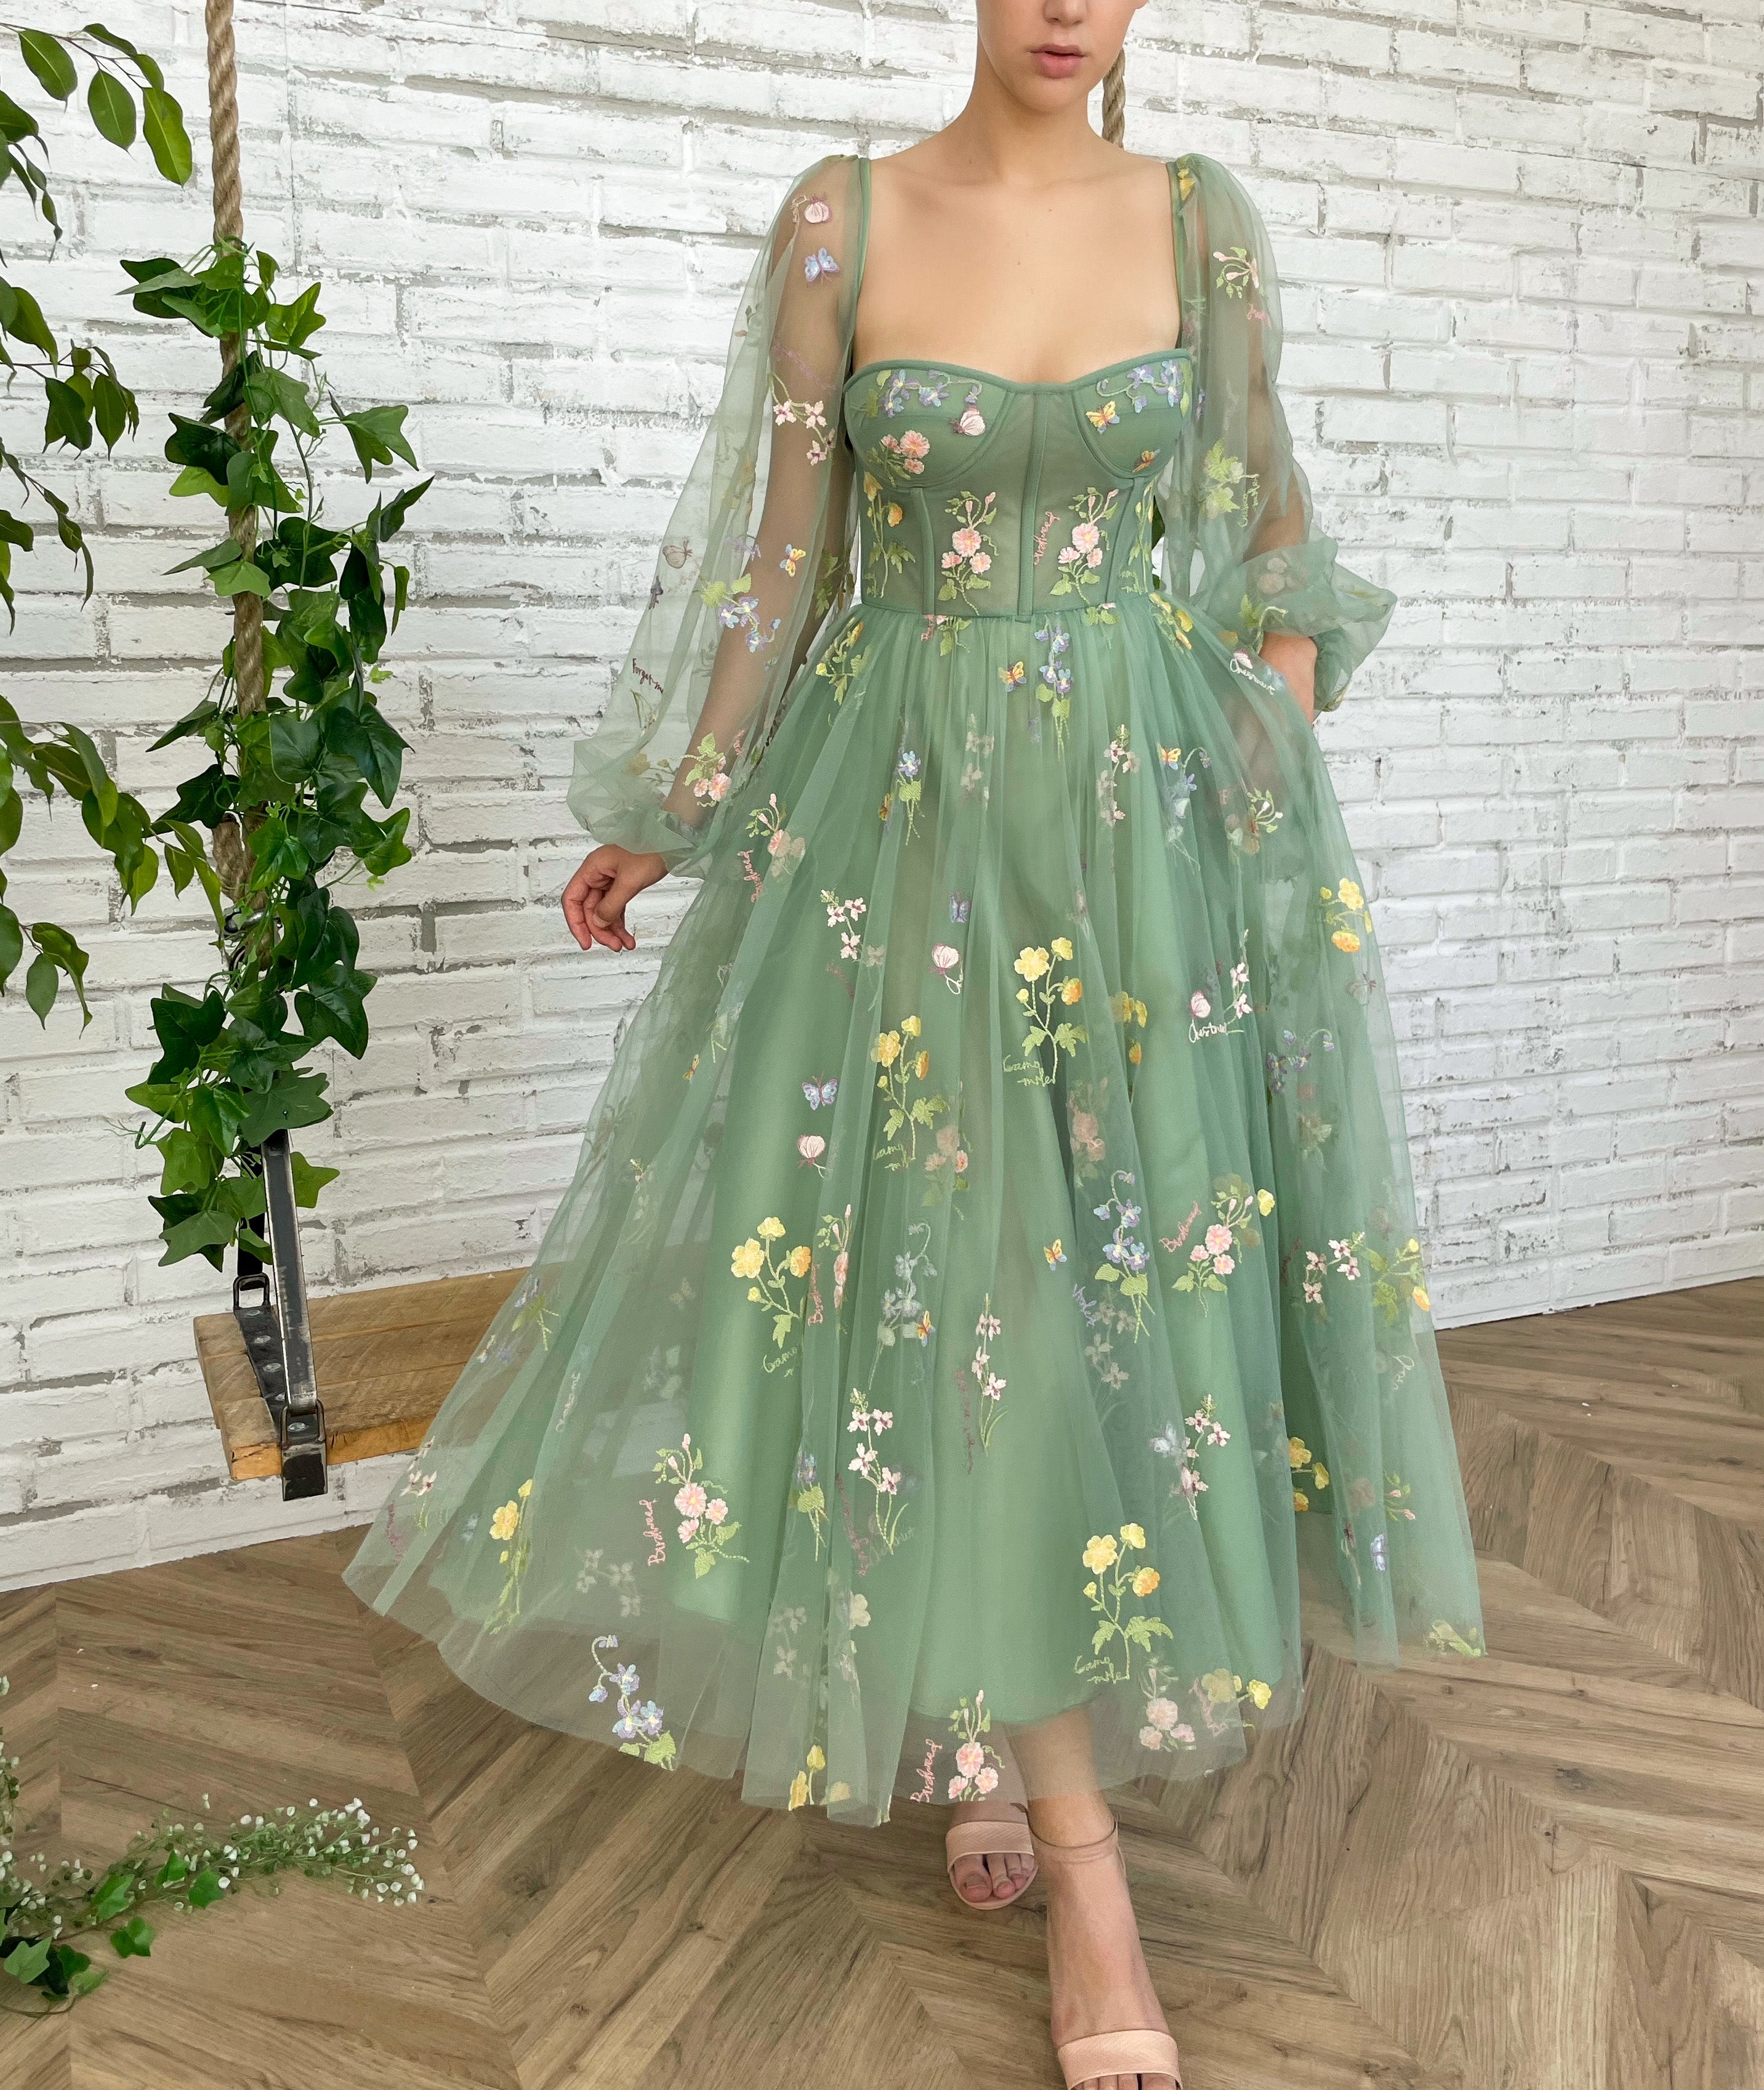 Green midi dress with long sleeves and flowers